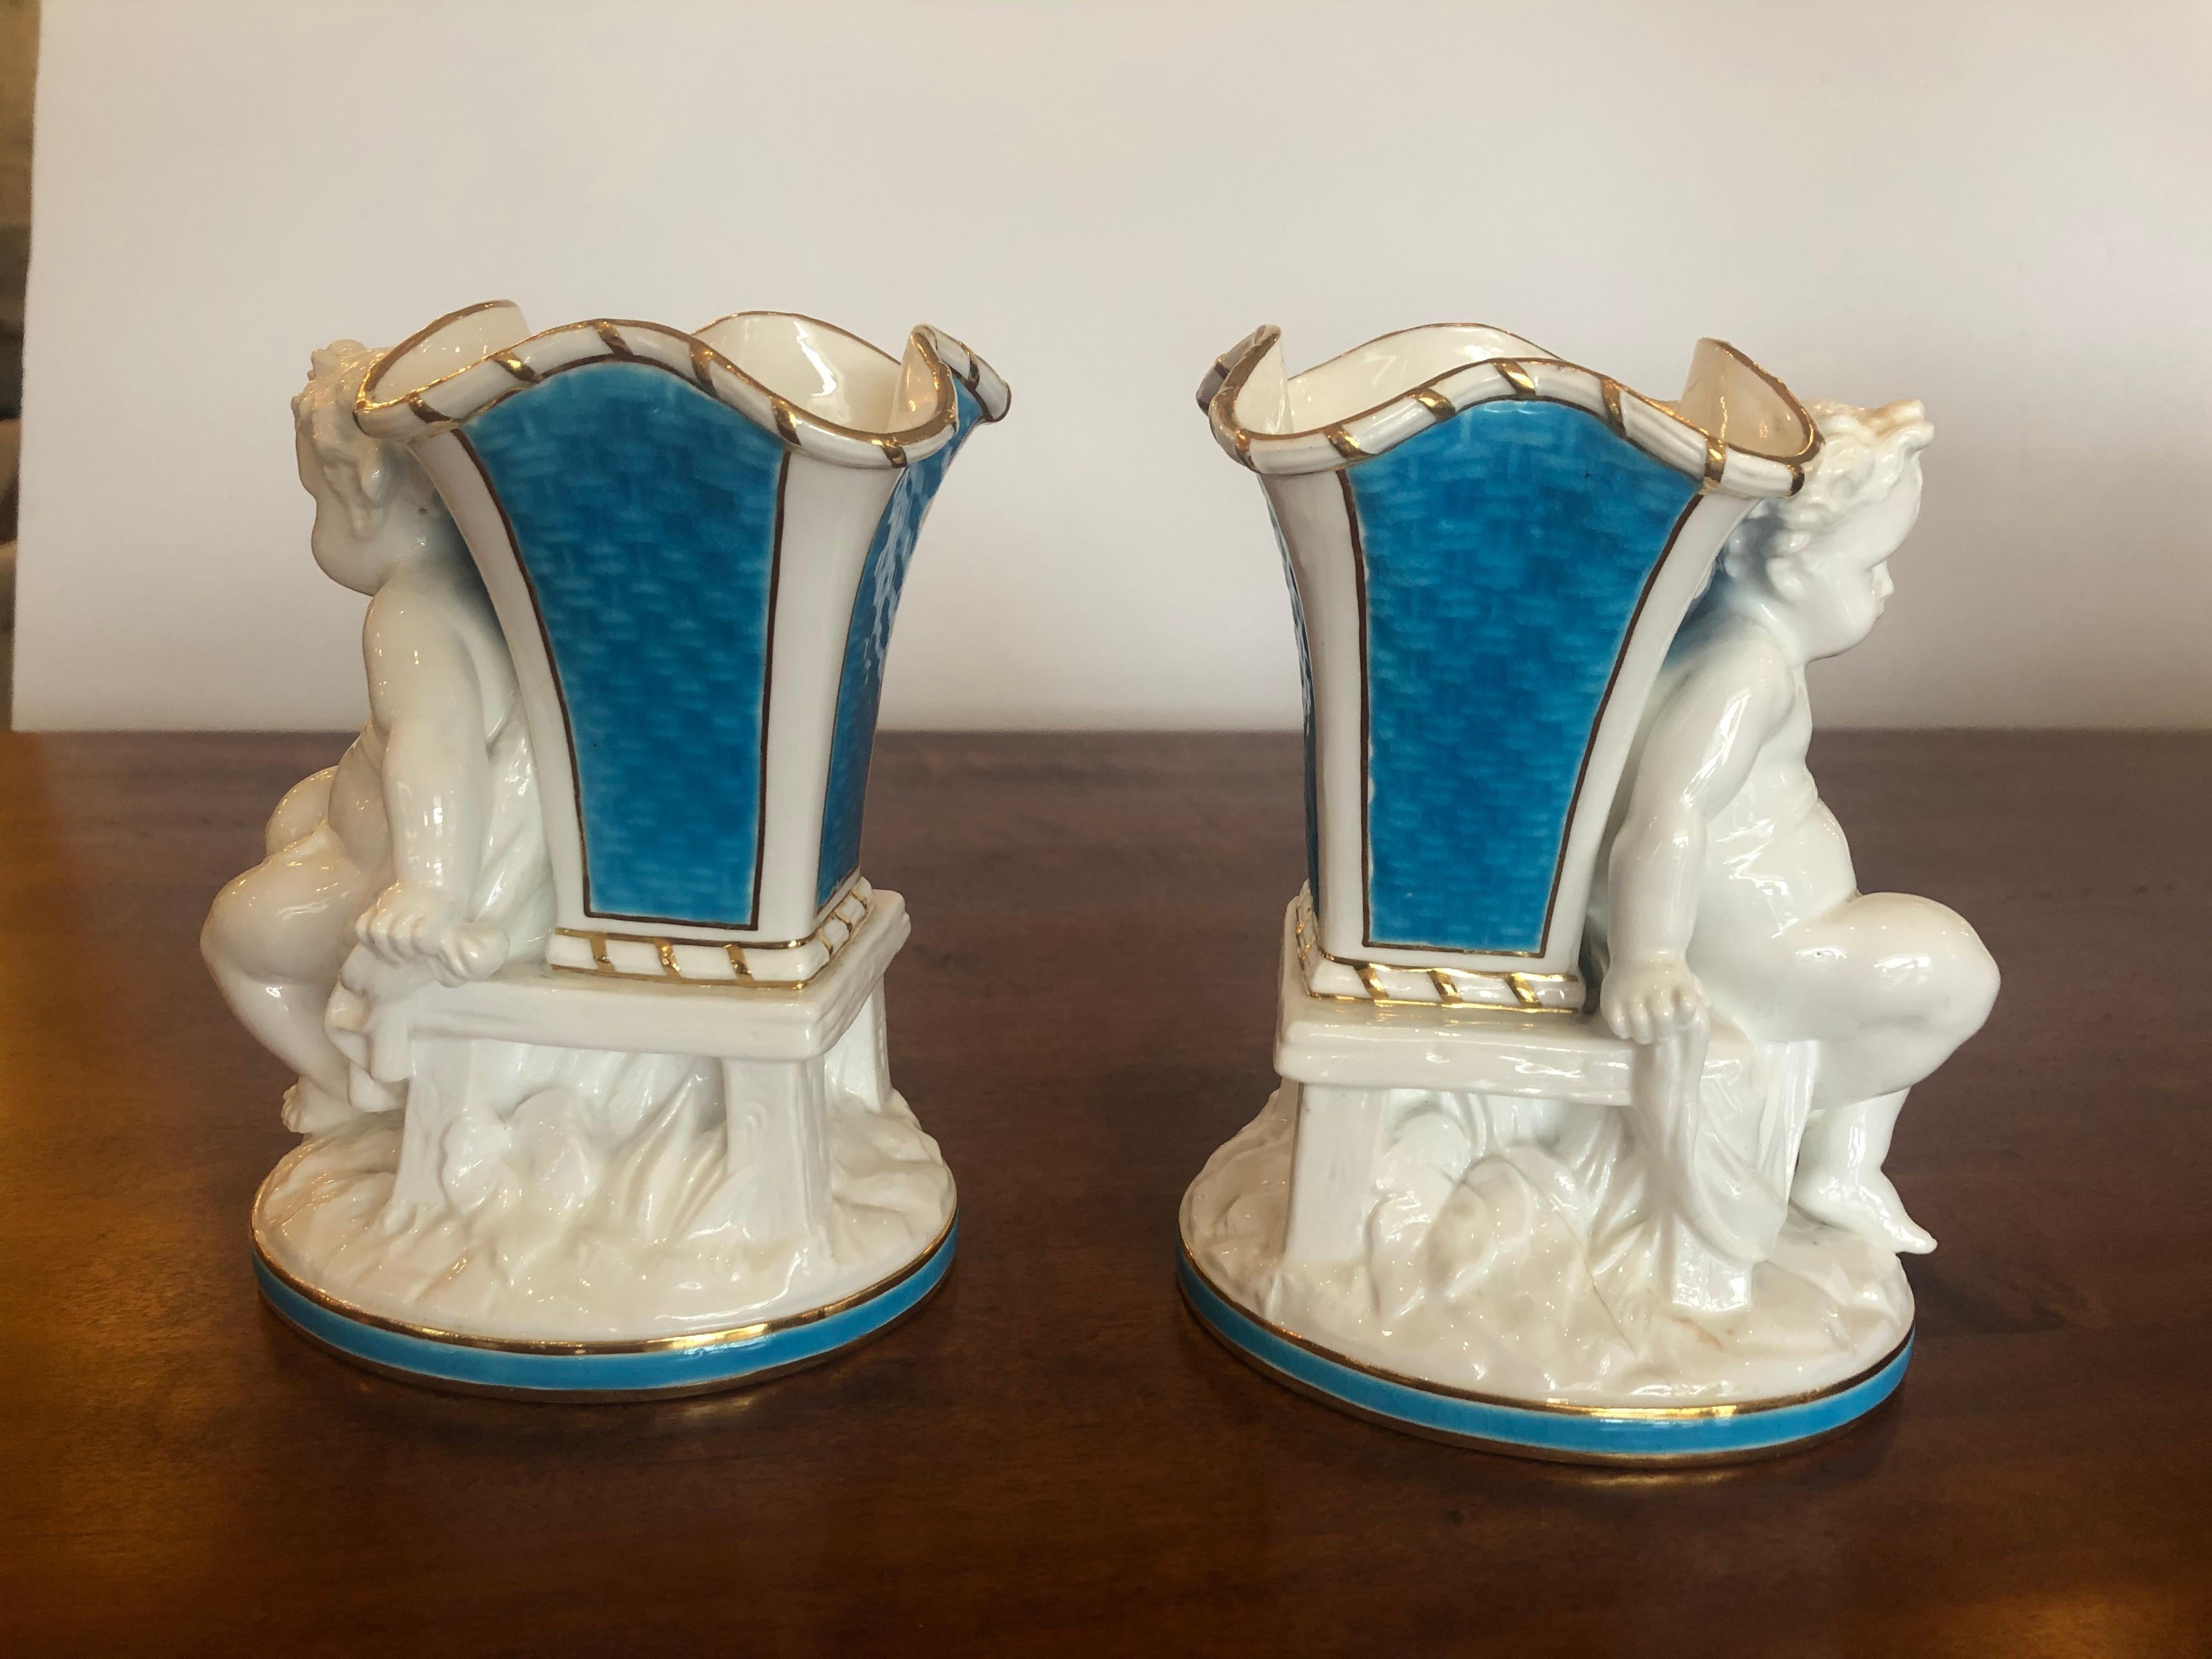 Superb Rare Pair of Cherub Minton Caldwell Tiffany Blue and White Spill Vases For Sale 7